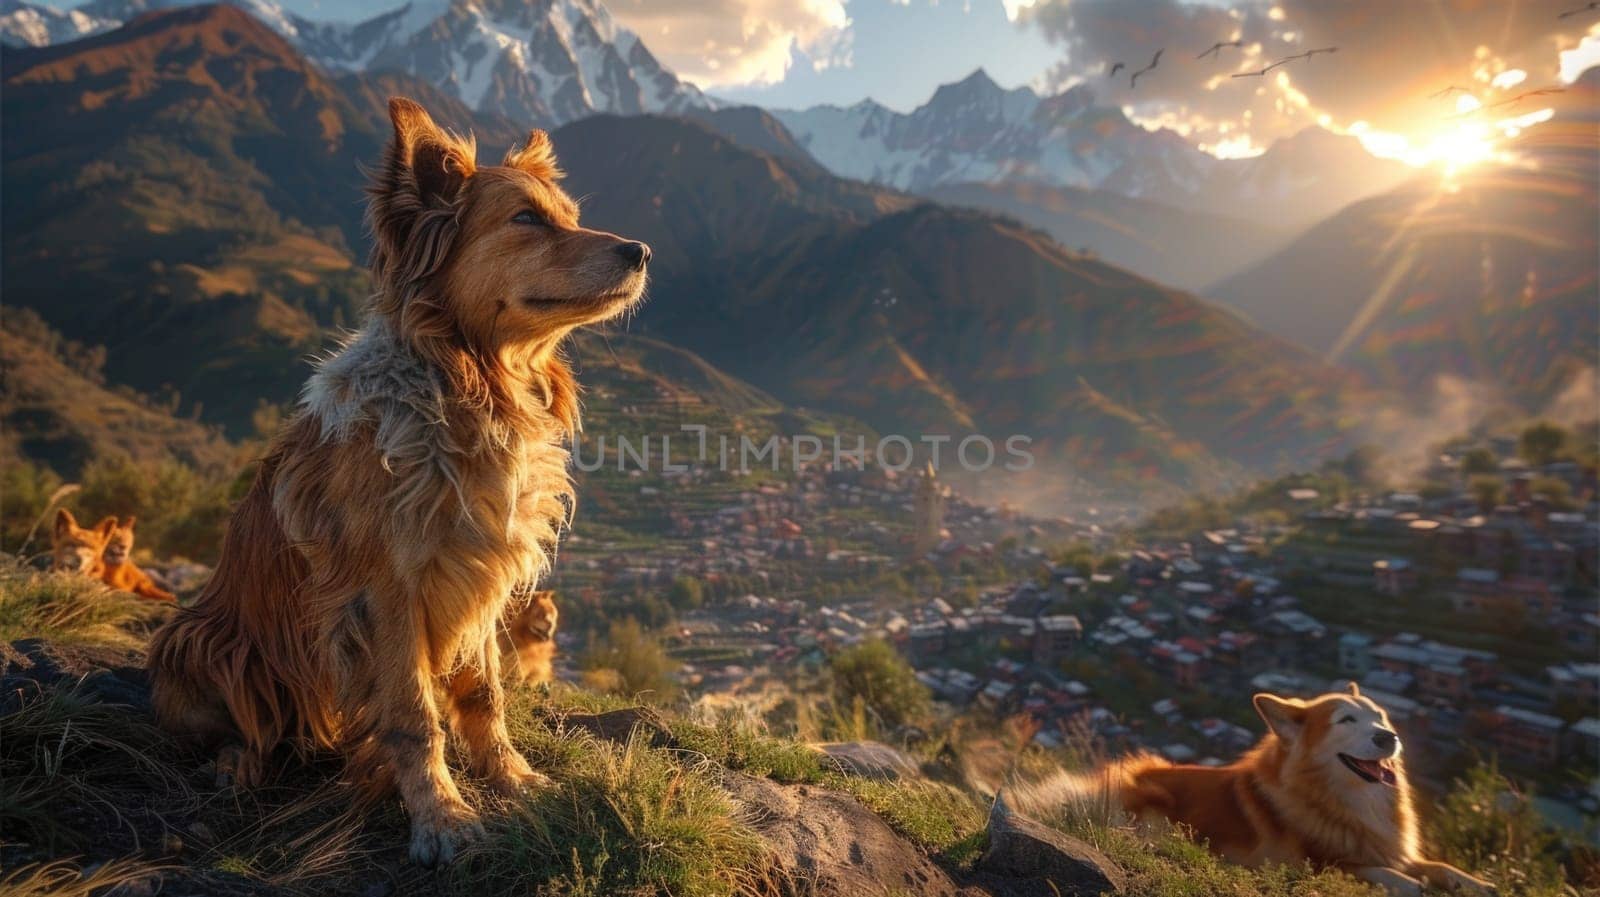 A dog and a cat are seated together on a hill, overlooking the landscape.